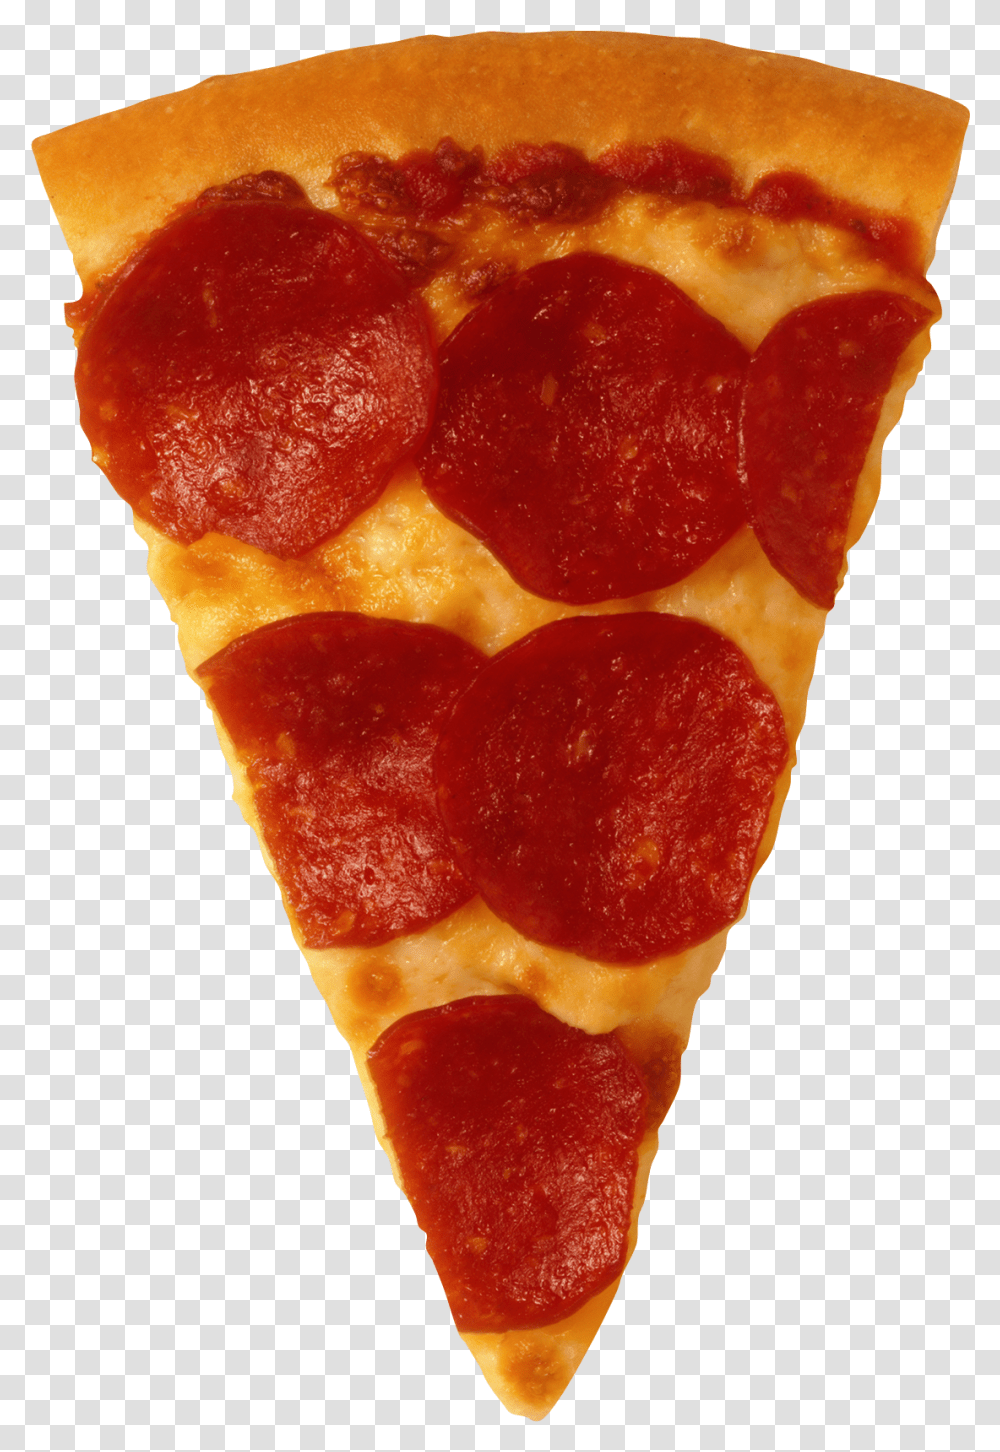 Pizza Delivery Pepperoni Hut 1 Pizza Slice Calories, Food, Sweets, Confectionery, Ketchup Transparent Png